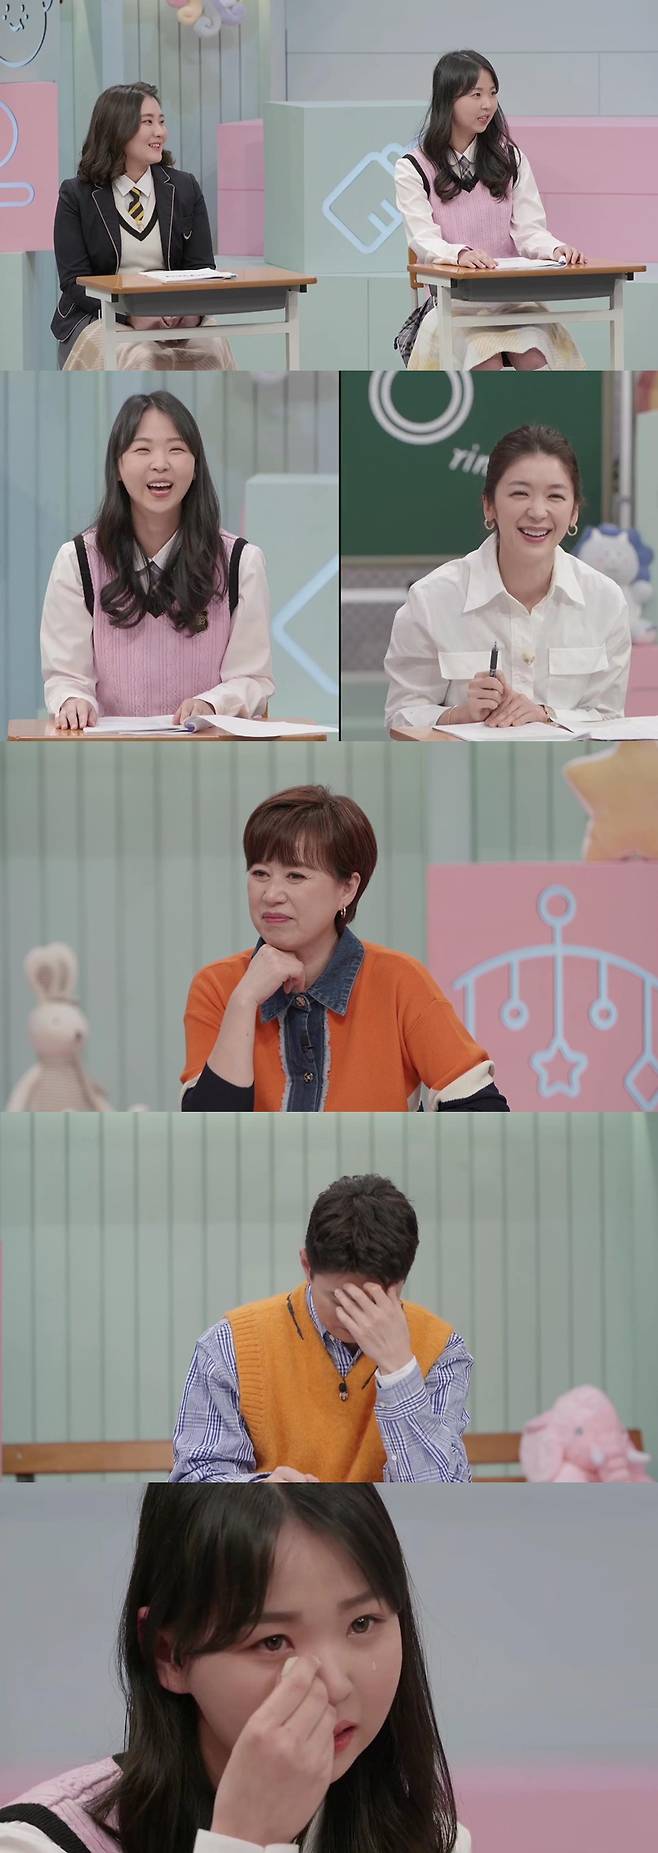 In the third episode of MBN High School Mom Dad, which will be broadcast on the 20th, Choi Min-ah, a Harang Mom who became a mother at the time of high school, and Kim Hyo-jin, a mother of Dodo Brother who gave birth to her first child at the time of high school, will appear for the first time to reveal her daily life.First of all, Choi Min-ah, who is raising a 14-month-old son Harangi, said, My mother-in-law is determined to appear in high school mom bad.I was surprised to hear that she had to recommend it unconditionally. She said, My mother-in-law likes trots and has a lot of talent. She boasts of her 45-year-old mother-in-law.In Choi Min-ahs story, Park Jae-yeon, a psychological counselor, said,  (My mother-in-law) is the same age as me.Kim Hyo-jin, an 18-month-old Doyun and a 7-month-old mother of Doyul, laughs brightly, saying, I think its time to show our children, and I want to leave good memories with my children.However, when the daily life of the two three moms is revealed, Studios becomes a tearful sea.When Choi Min-ahs mother-in-law, who attended the birthday party of Harangi, was seen, Park Mi-sun said, Moms are all hearts ... and Kim Hyo-jin and the first son, who live in Hospital, appear.The production team said, The high school mom dad, who is raising children well with a good case of parents active support, and the first son who has a rare cancer battle, and the high school mom dad, who is a seven-month-old son, are more immersed and sympathetic than ever.It will be a time when fun, impression, and information will be abundant, with advice on parenting from the perspective of experts and lectures on sex education by Lee Si-hoon. The high school mom dad three times that adults do not know will be broadcast at 9:20 pm on Sunday 20th.Photo = MBN high school mom dad